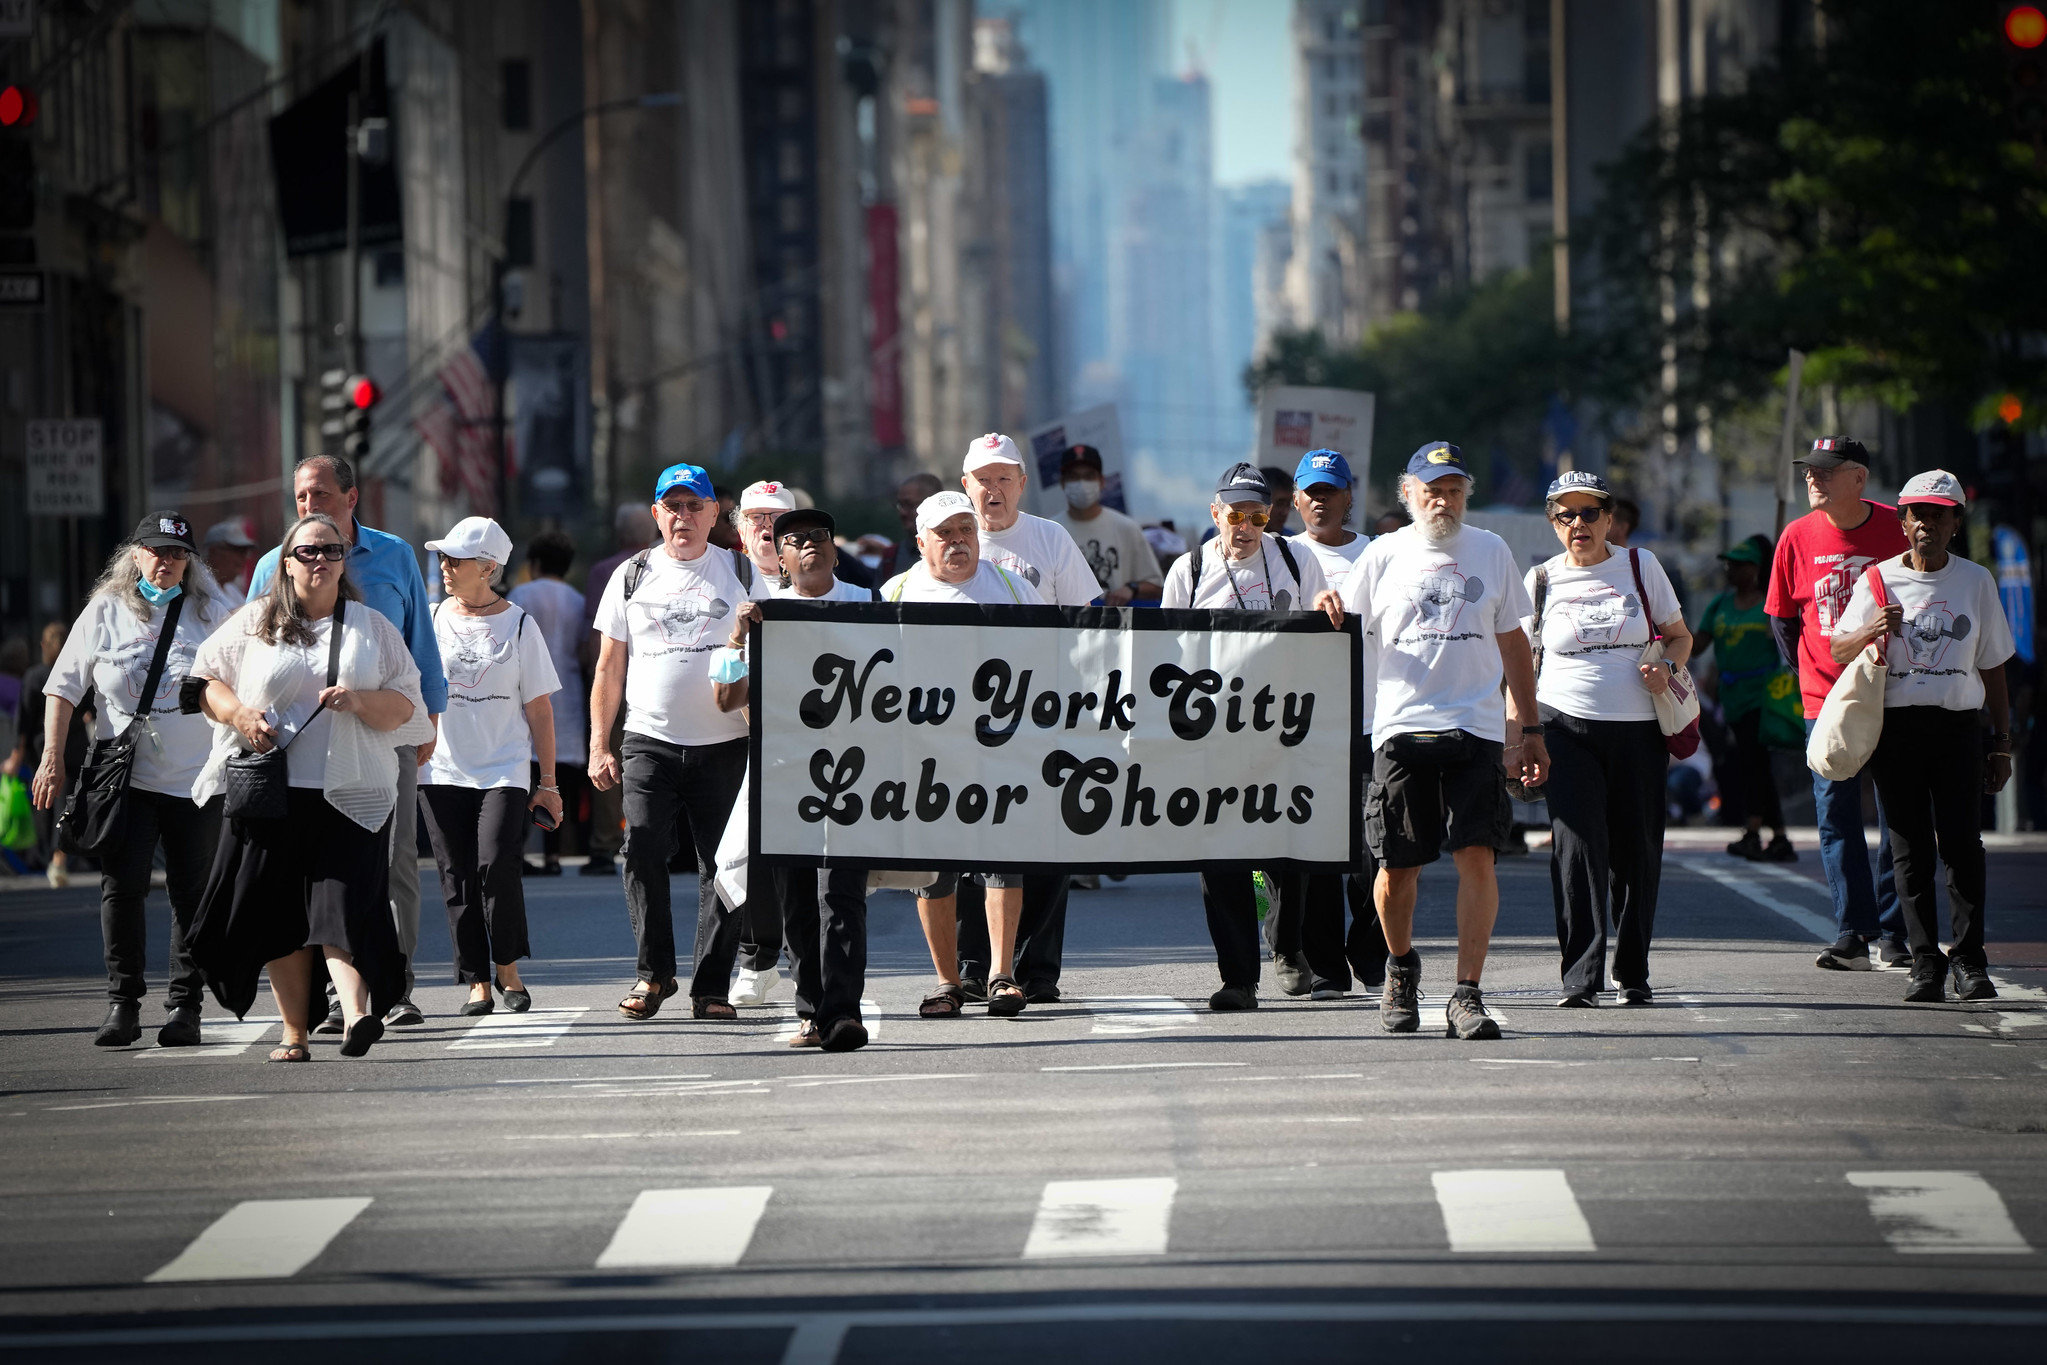 A group of trade union labor members march in the Labor Day parade behind a banner that says "New York City Labor Chorus"